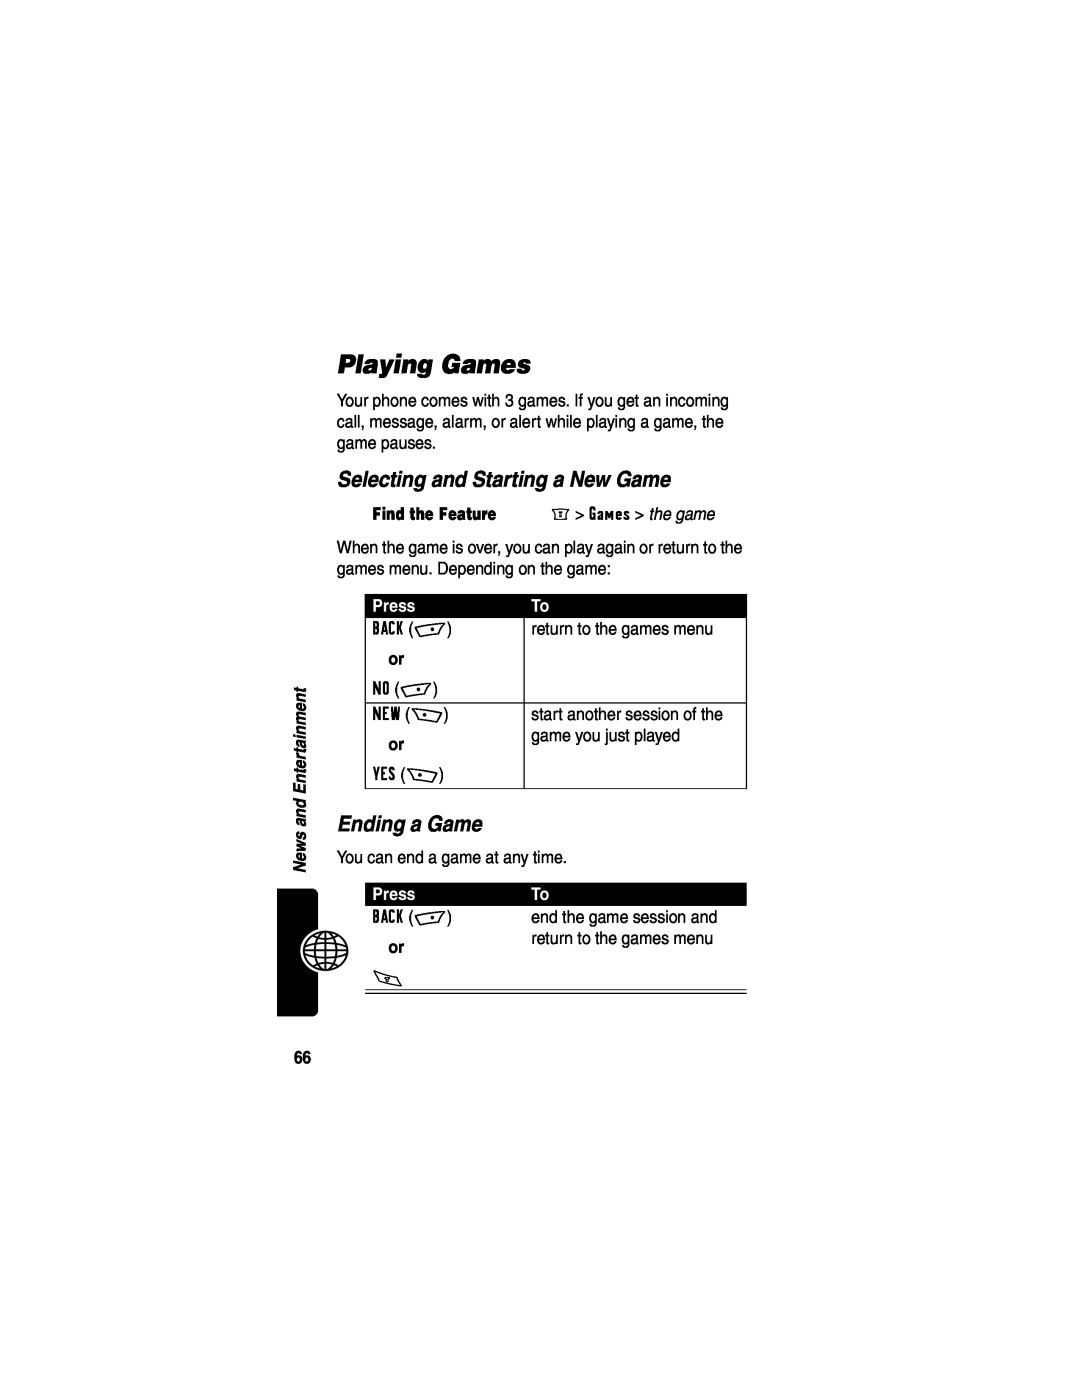 Motorola WIRELESS TELEPHONE manual Playing Games, Selecting and Starting a New Game, Ending a Game, Press 